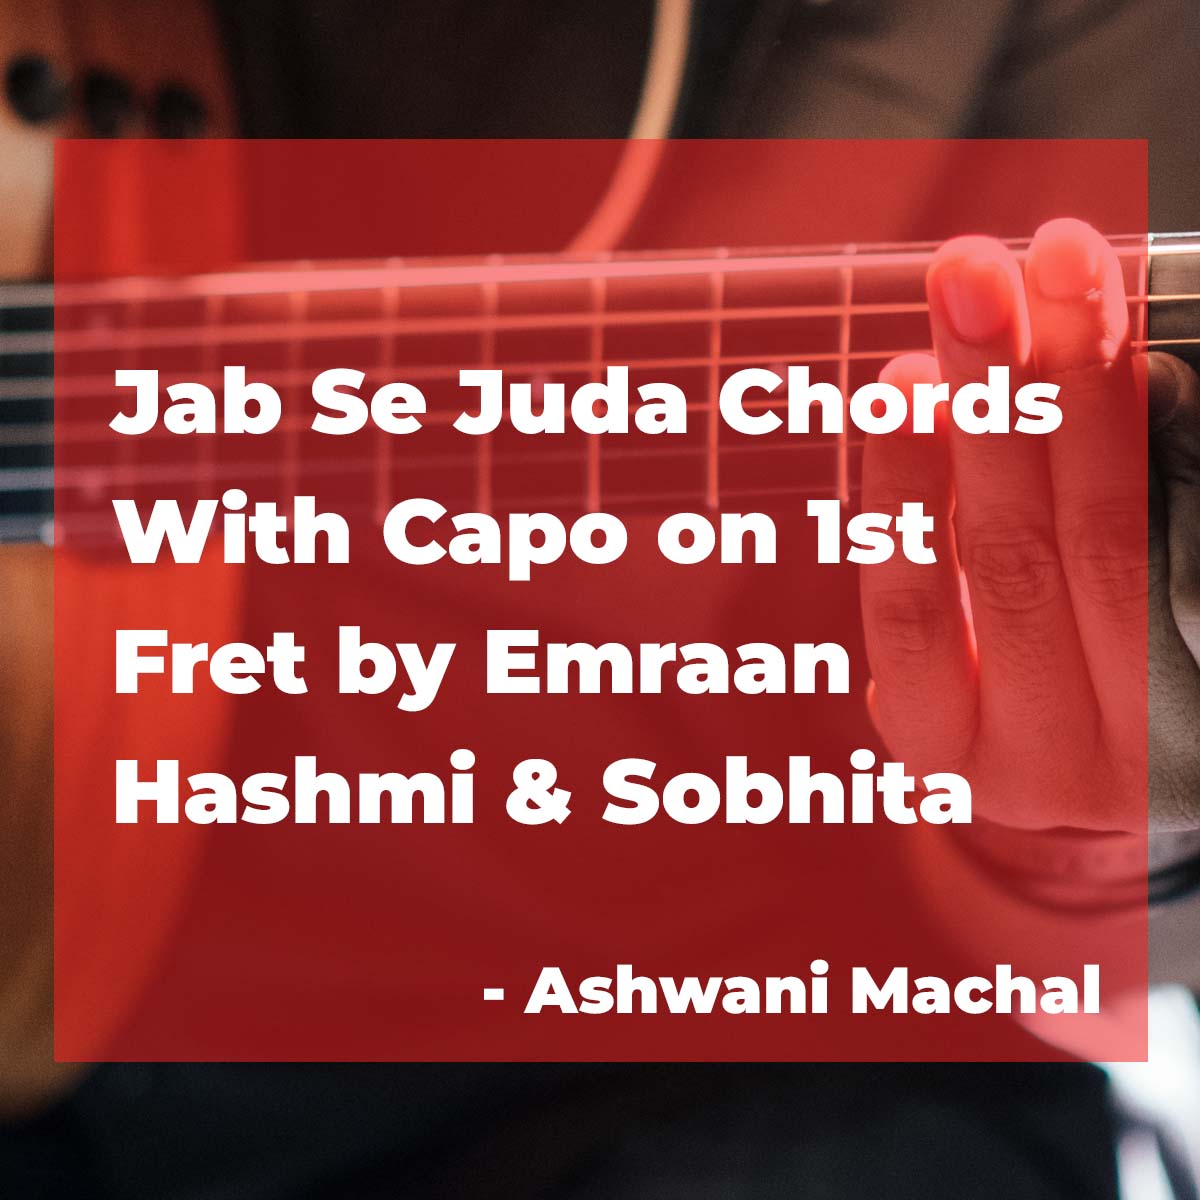 Jab Se Juda Chords on Guitar with Capo on 1st Fret by Emraan Hashmi